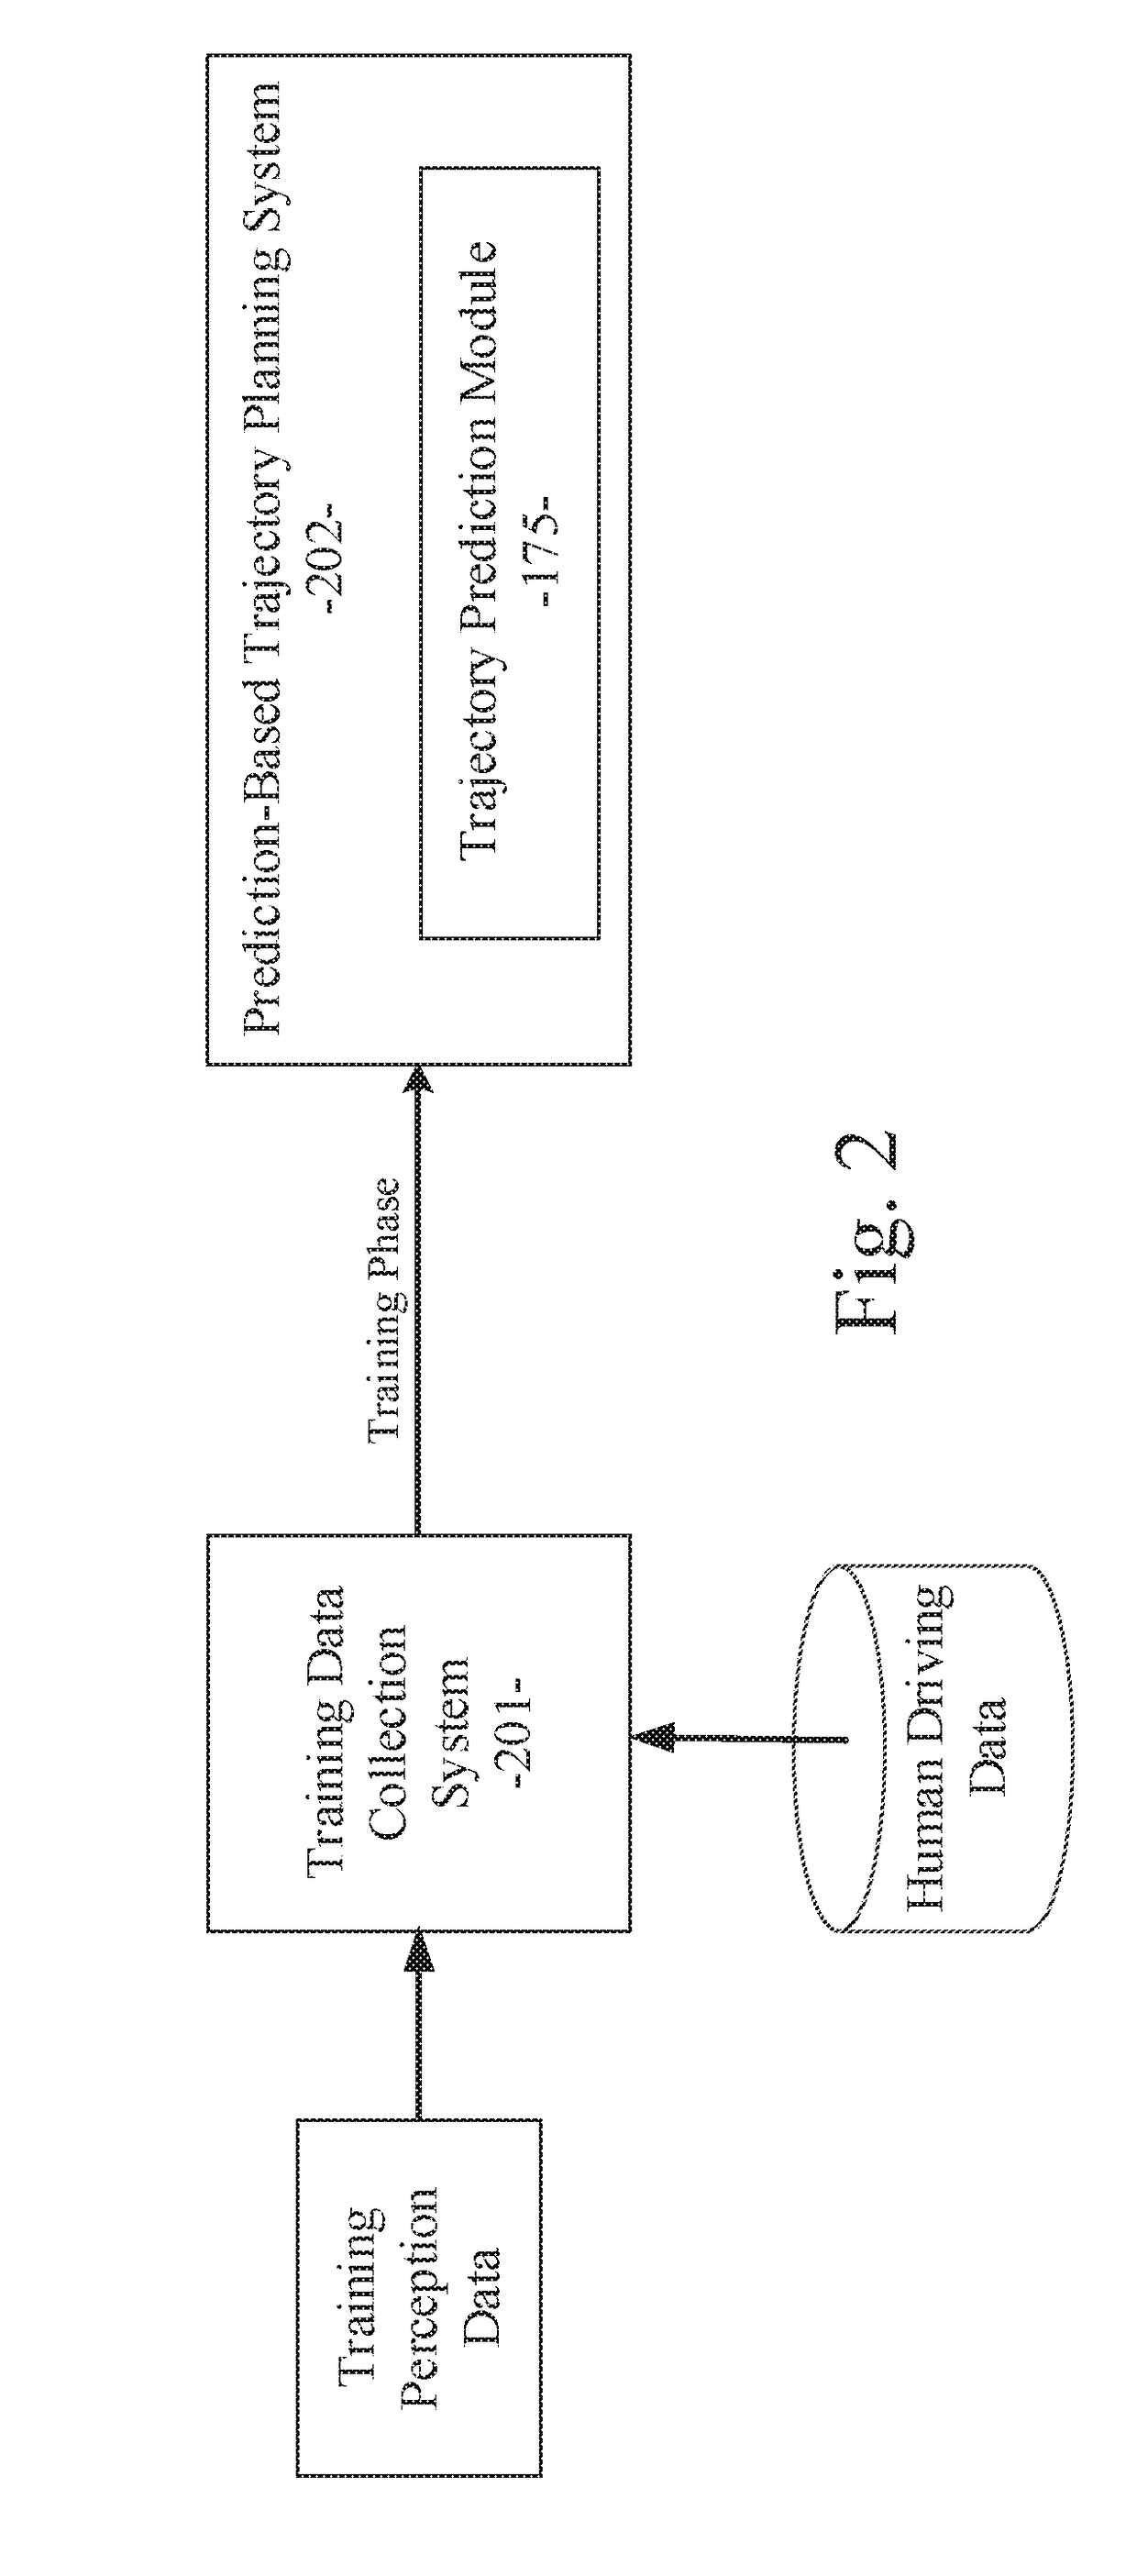 Prediction-based system and method for trajectory planning of autonomous vehicles